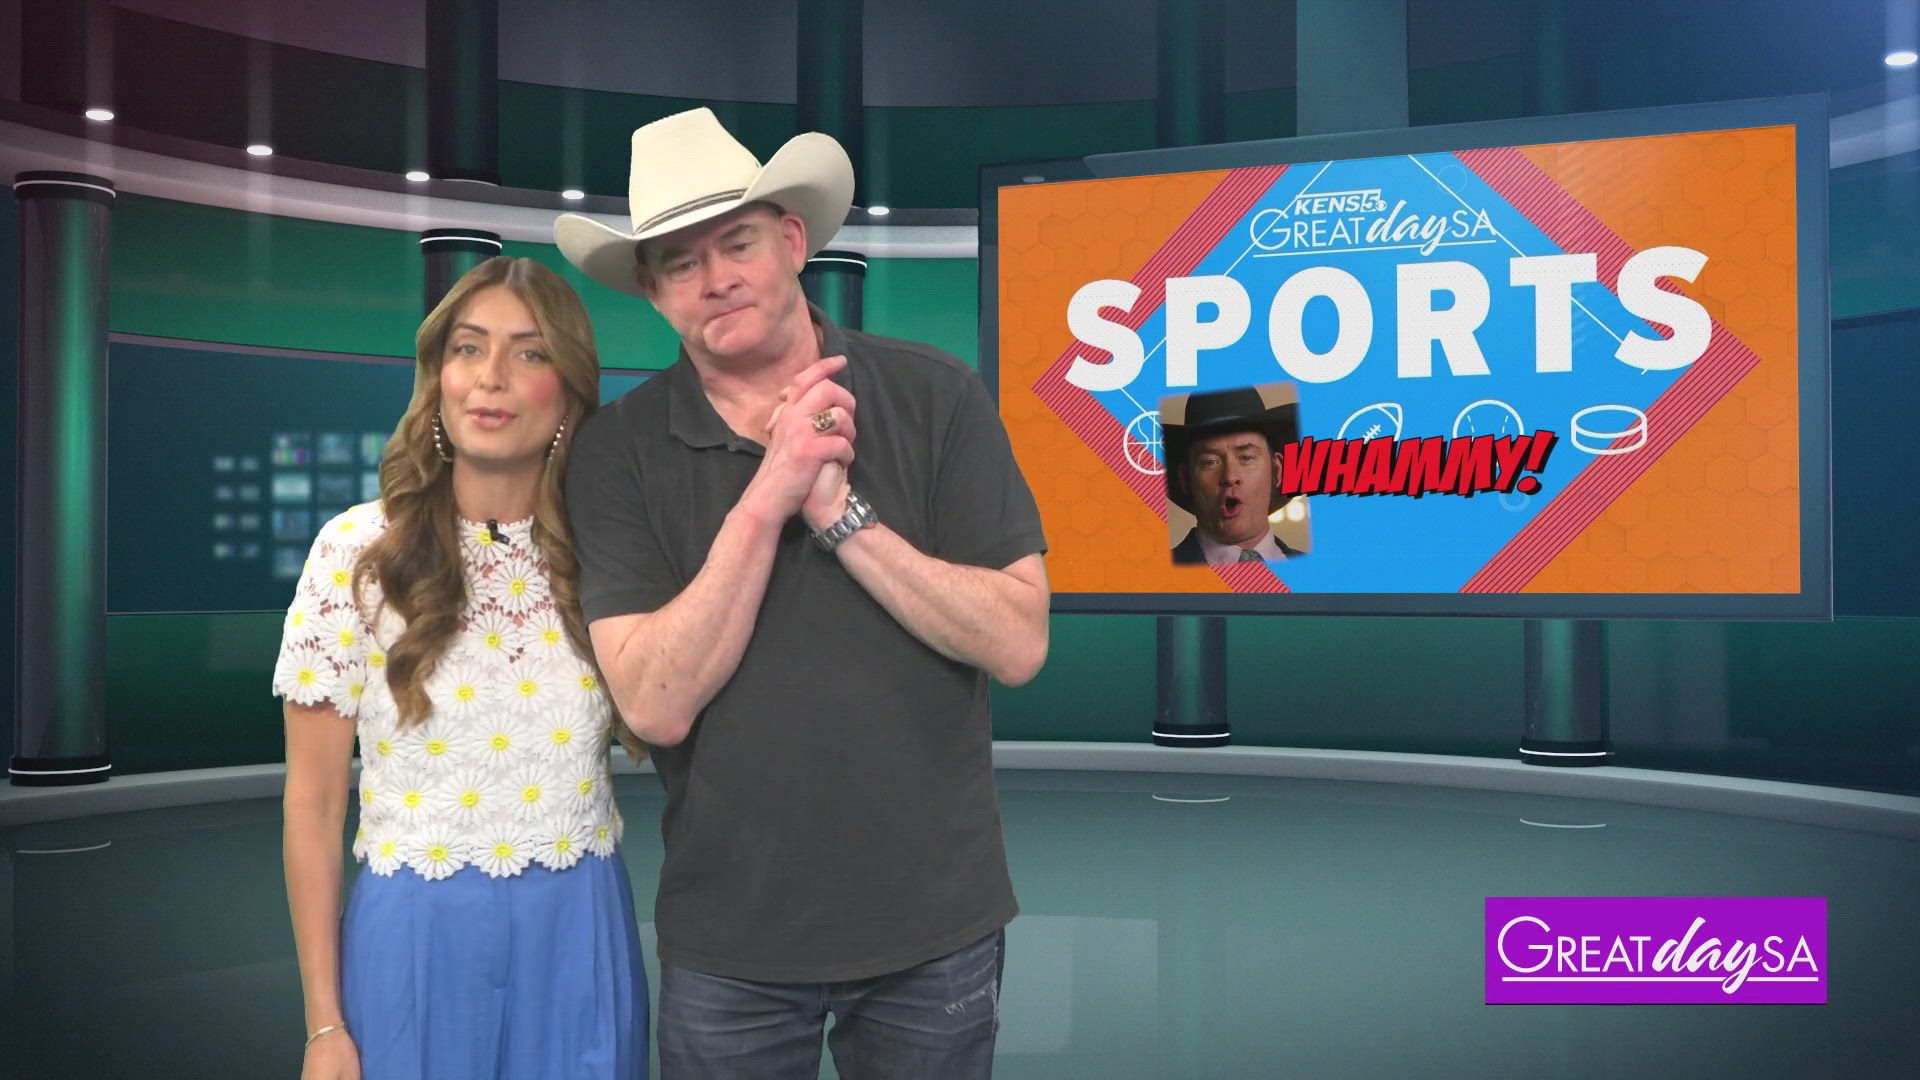 Actor & Comedian David Koechner stops by Great Day SA